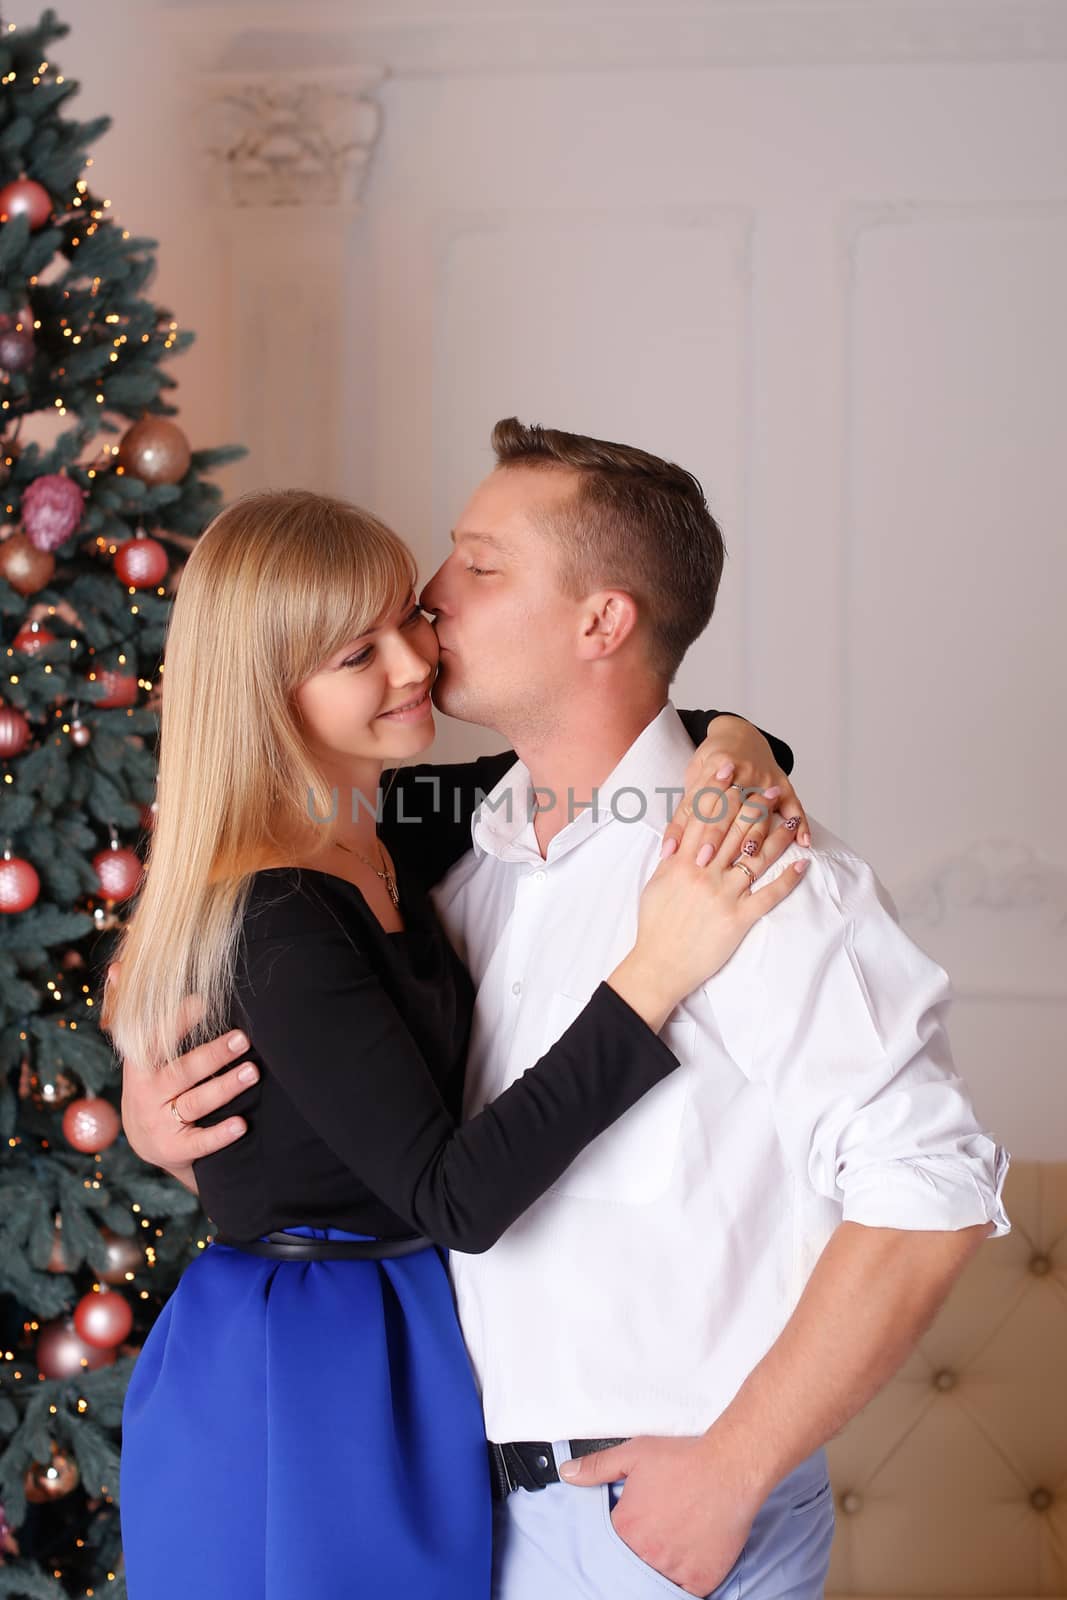 The man and the woman near the Christmas tree on Christmas Eve